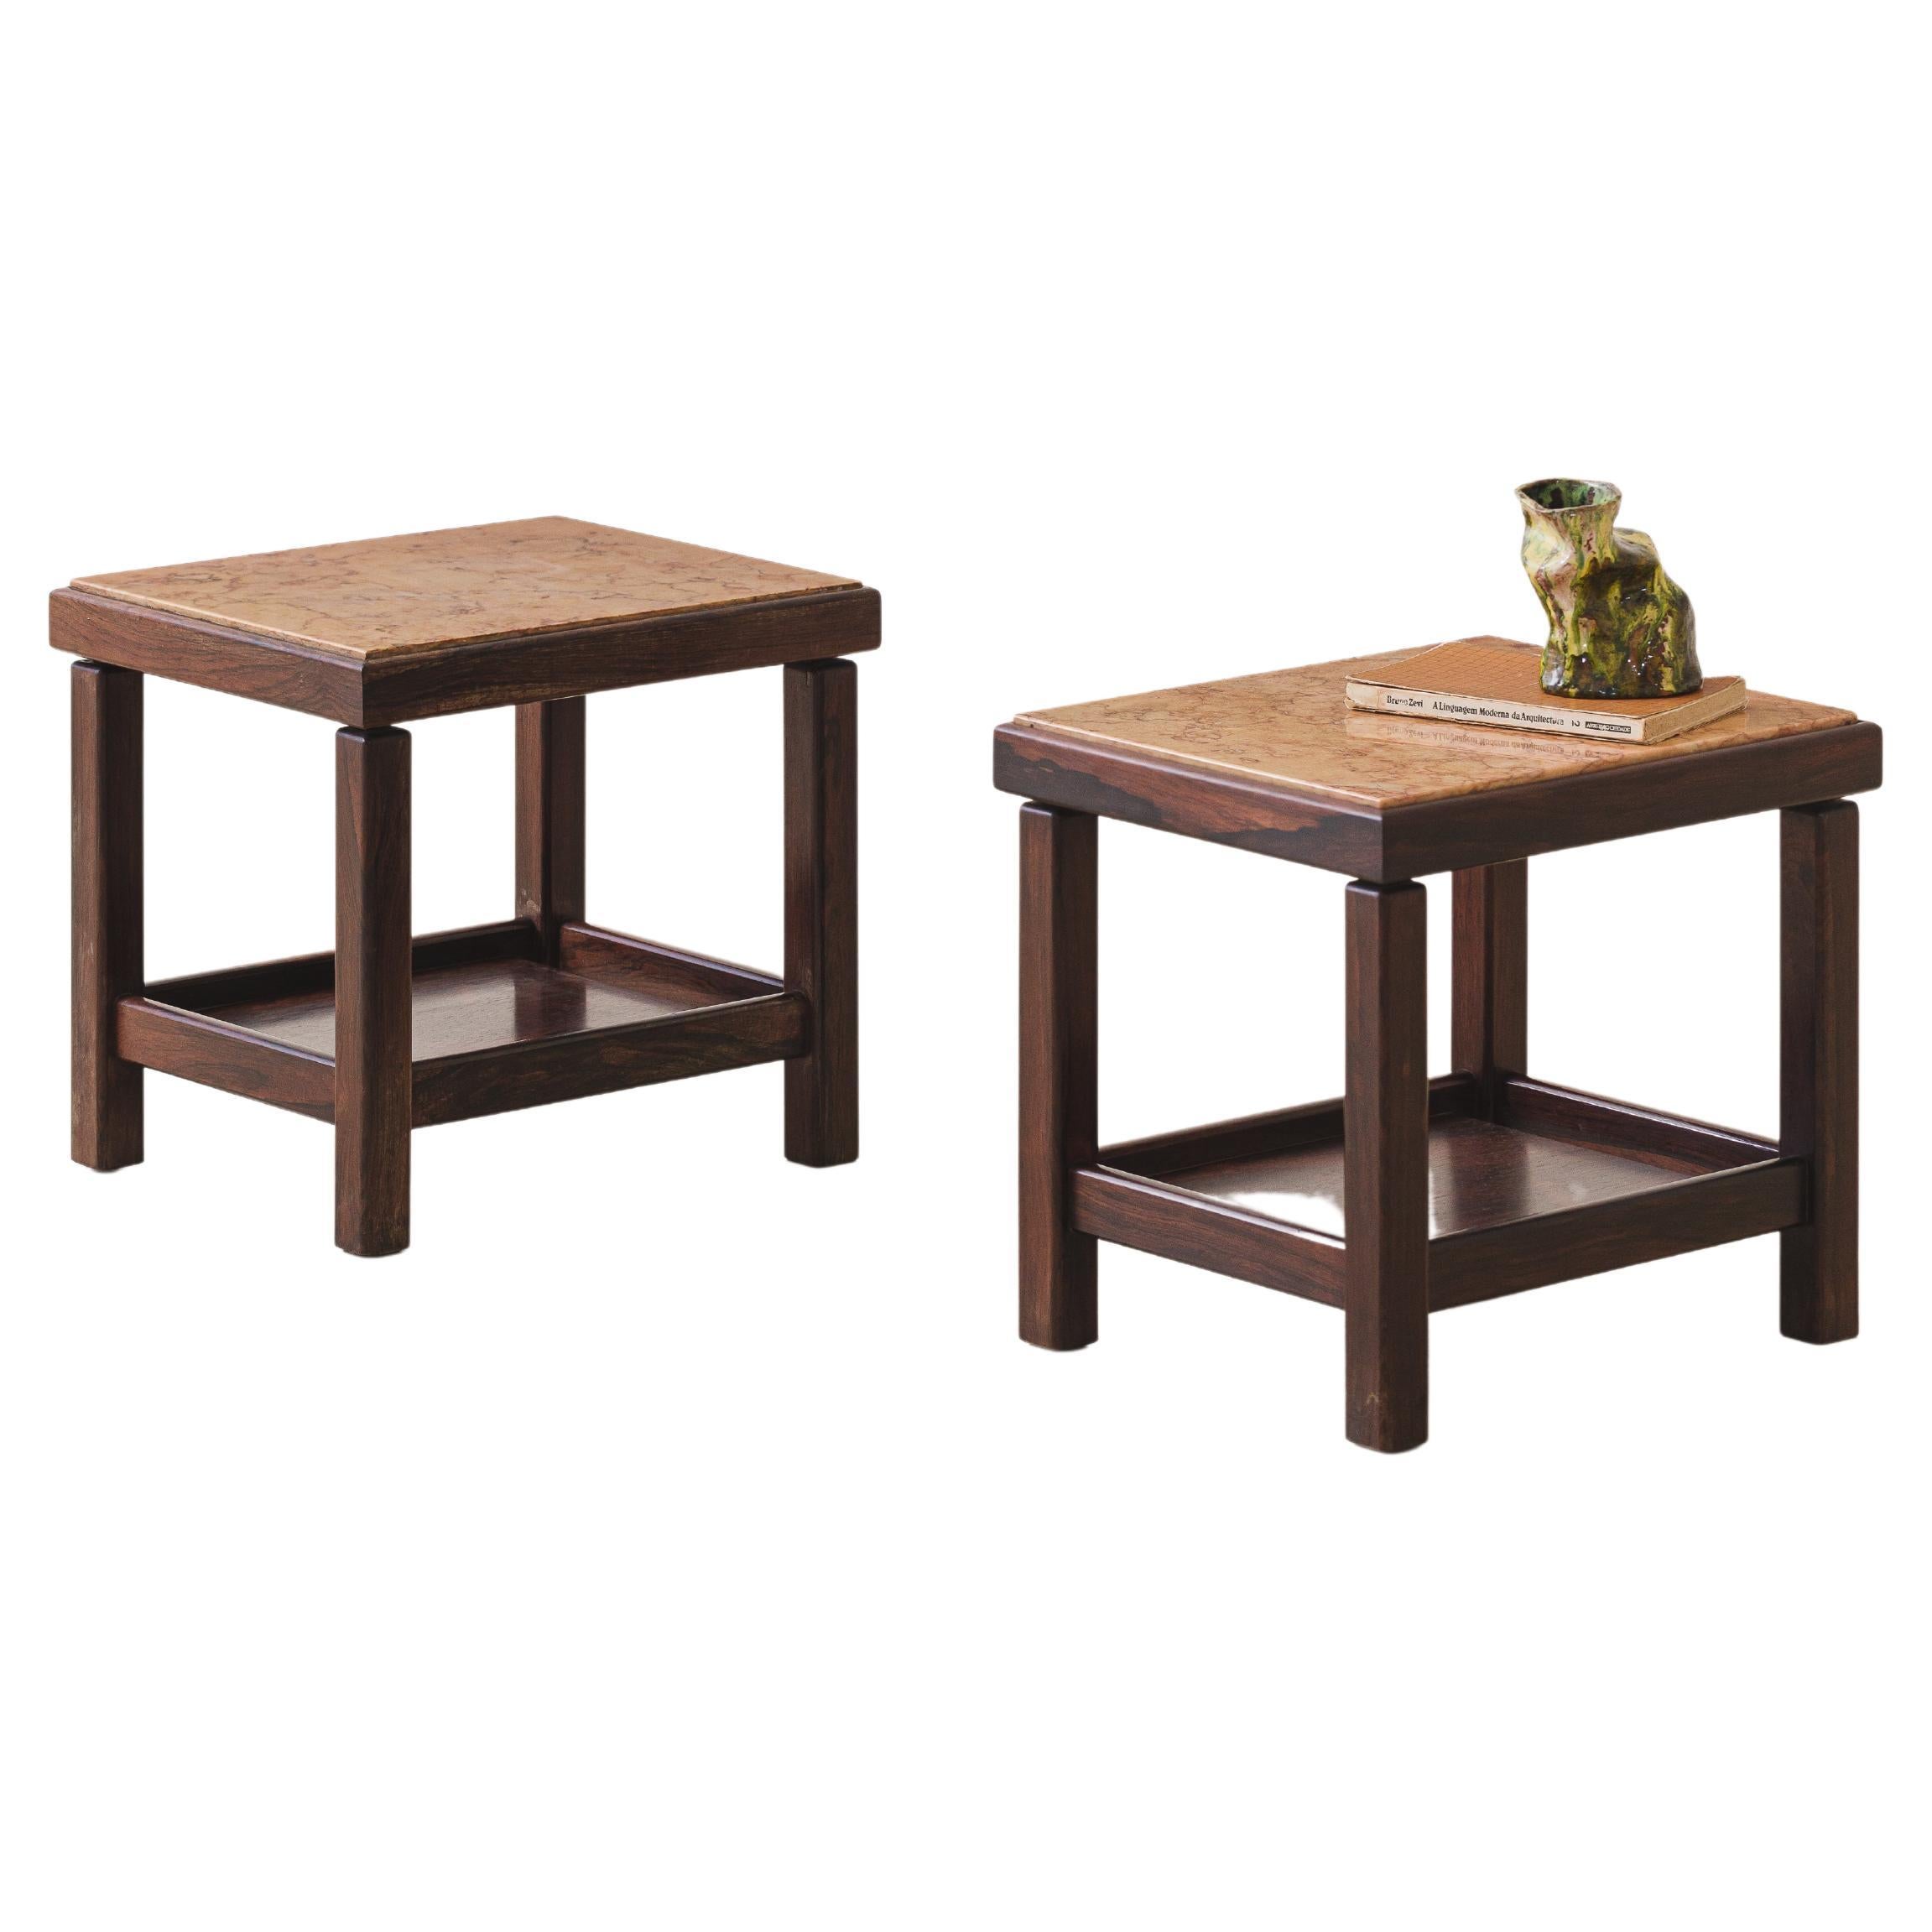 Pair of Rosewood and Marble Side Tables, Design by Unknown Artist, Brazil, 1960s